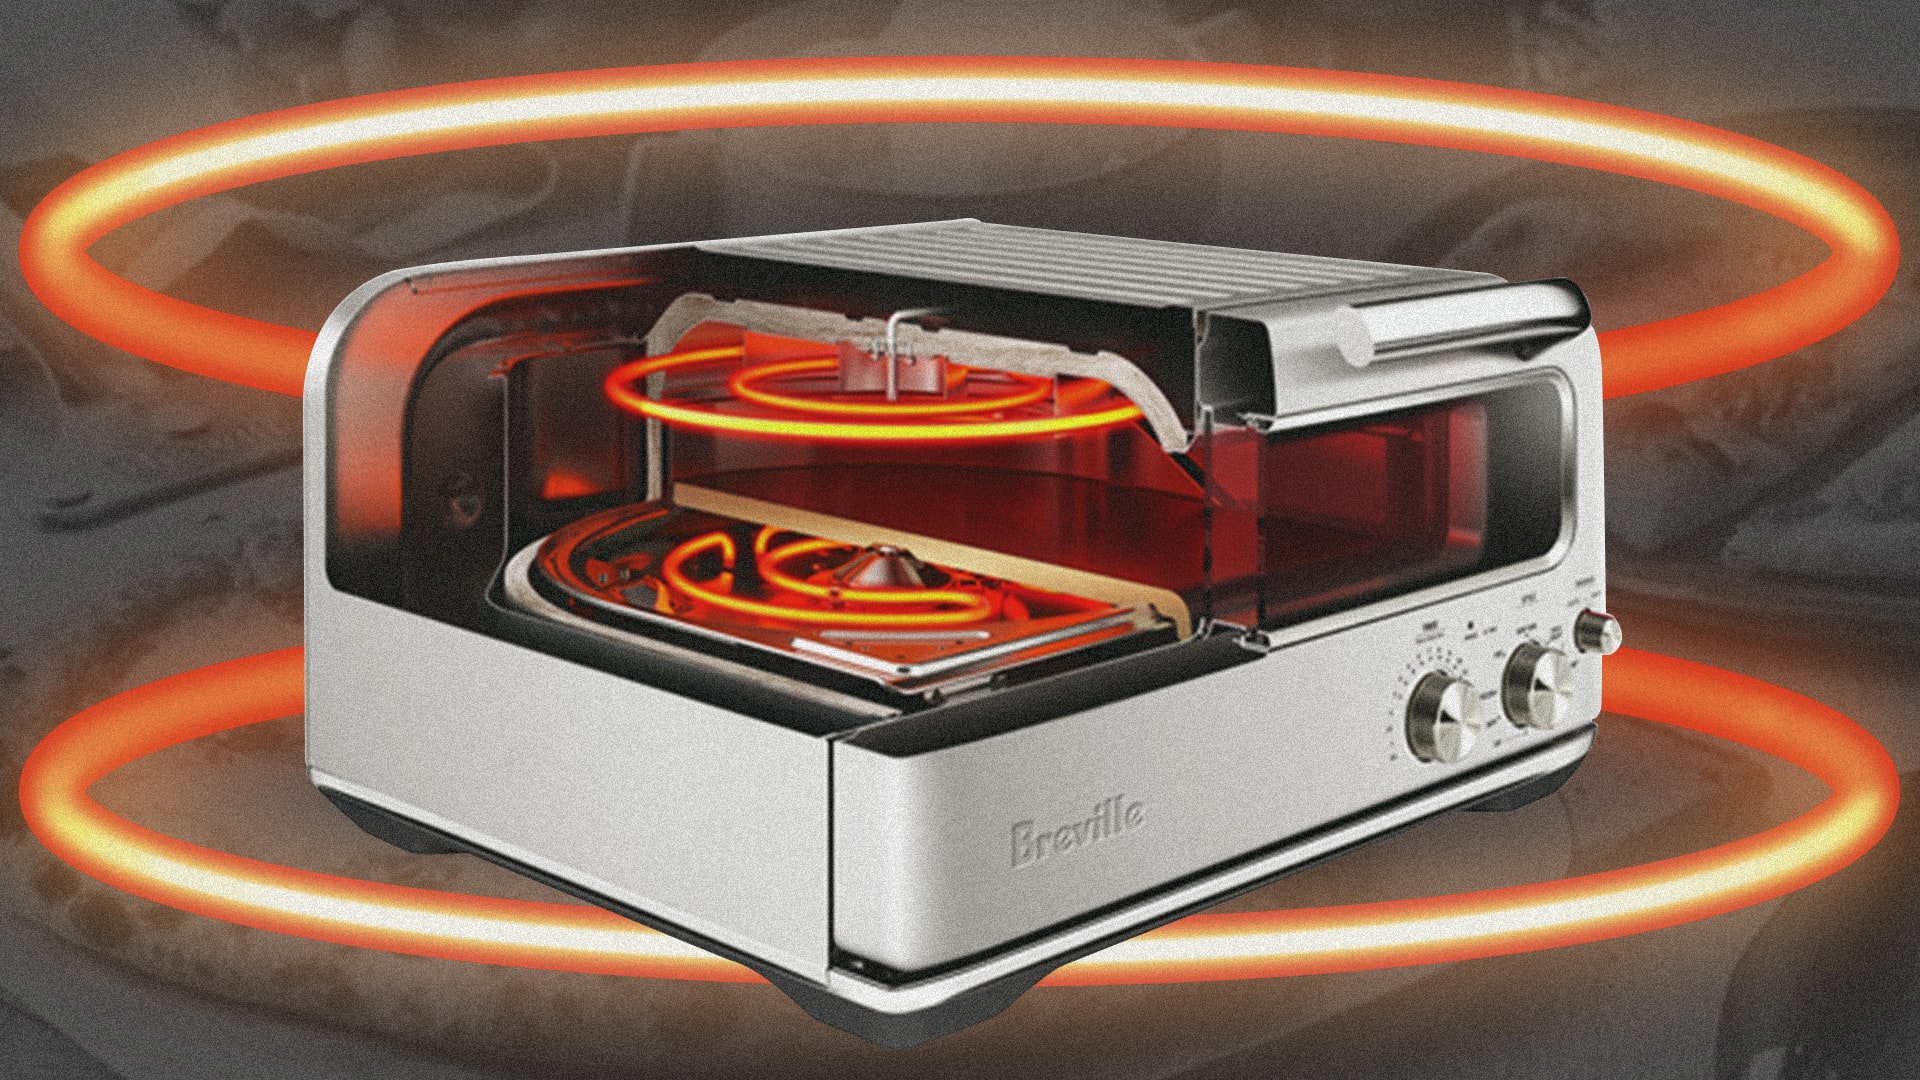 This $800 countertop pizza oven is the pinnacle of human achievement